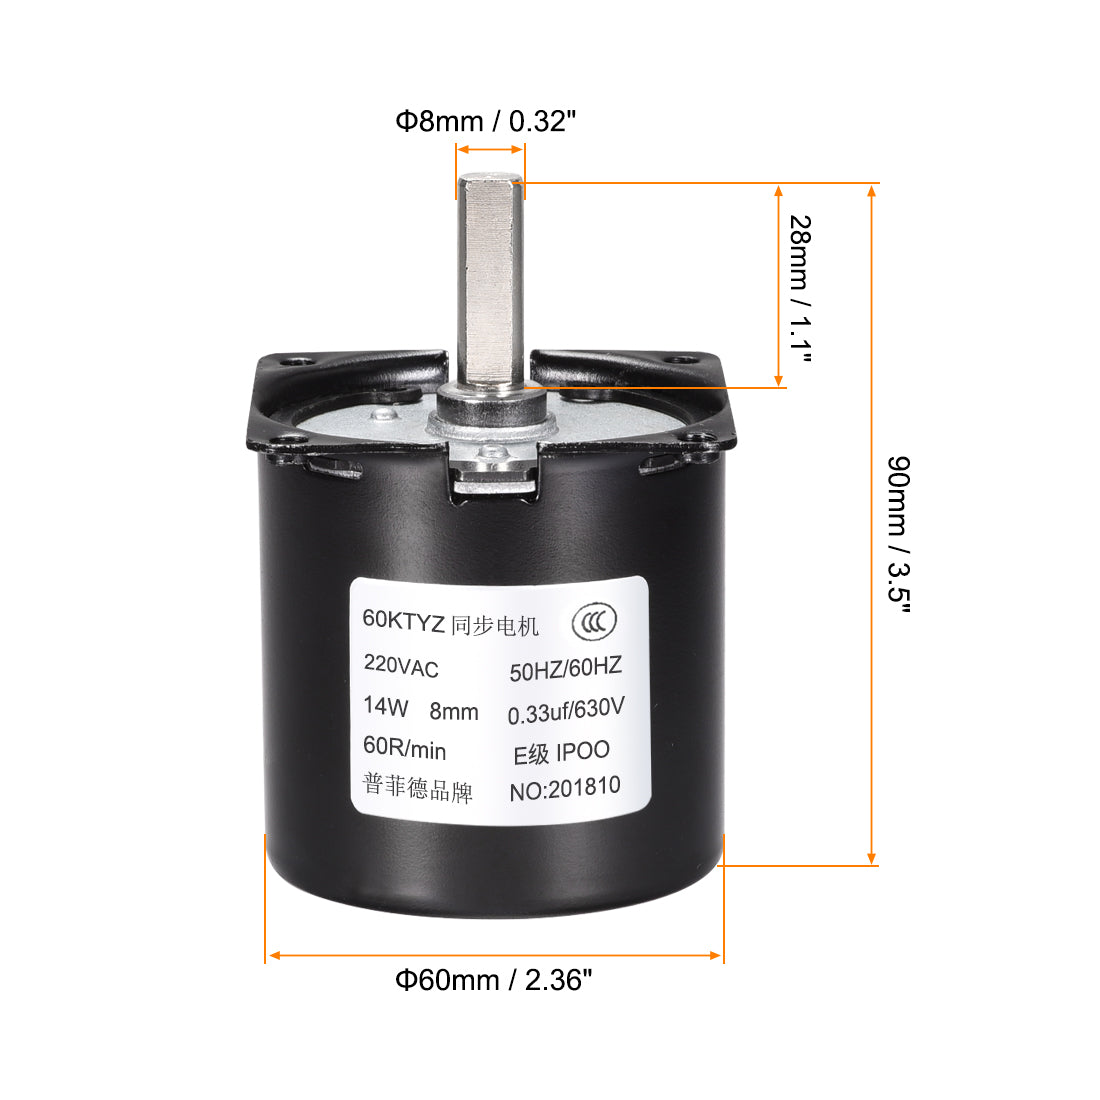 uxcell Uxcell AC 220V Electric Synchronous Motor Metal Gear Turntable /C 60RPM 50-60HZ 14W 8mm Dia Eccentric Shaft